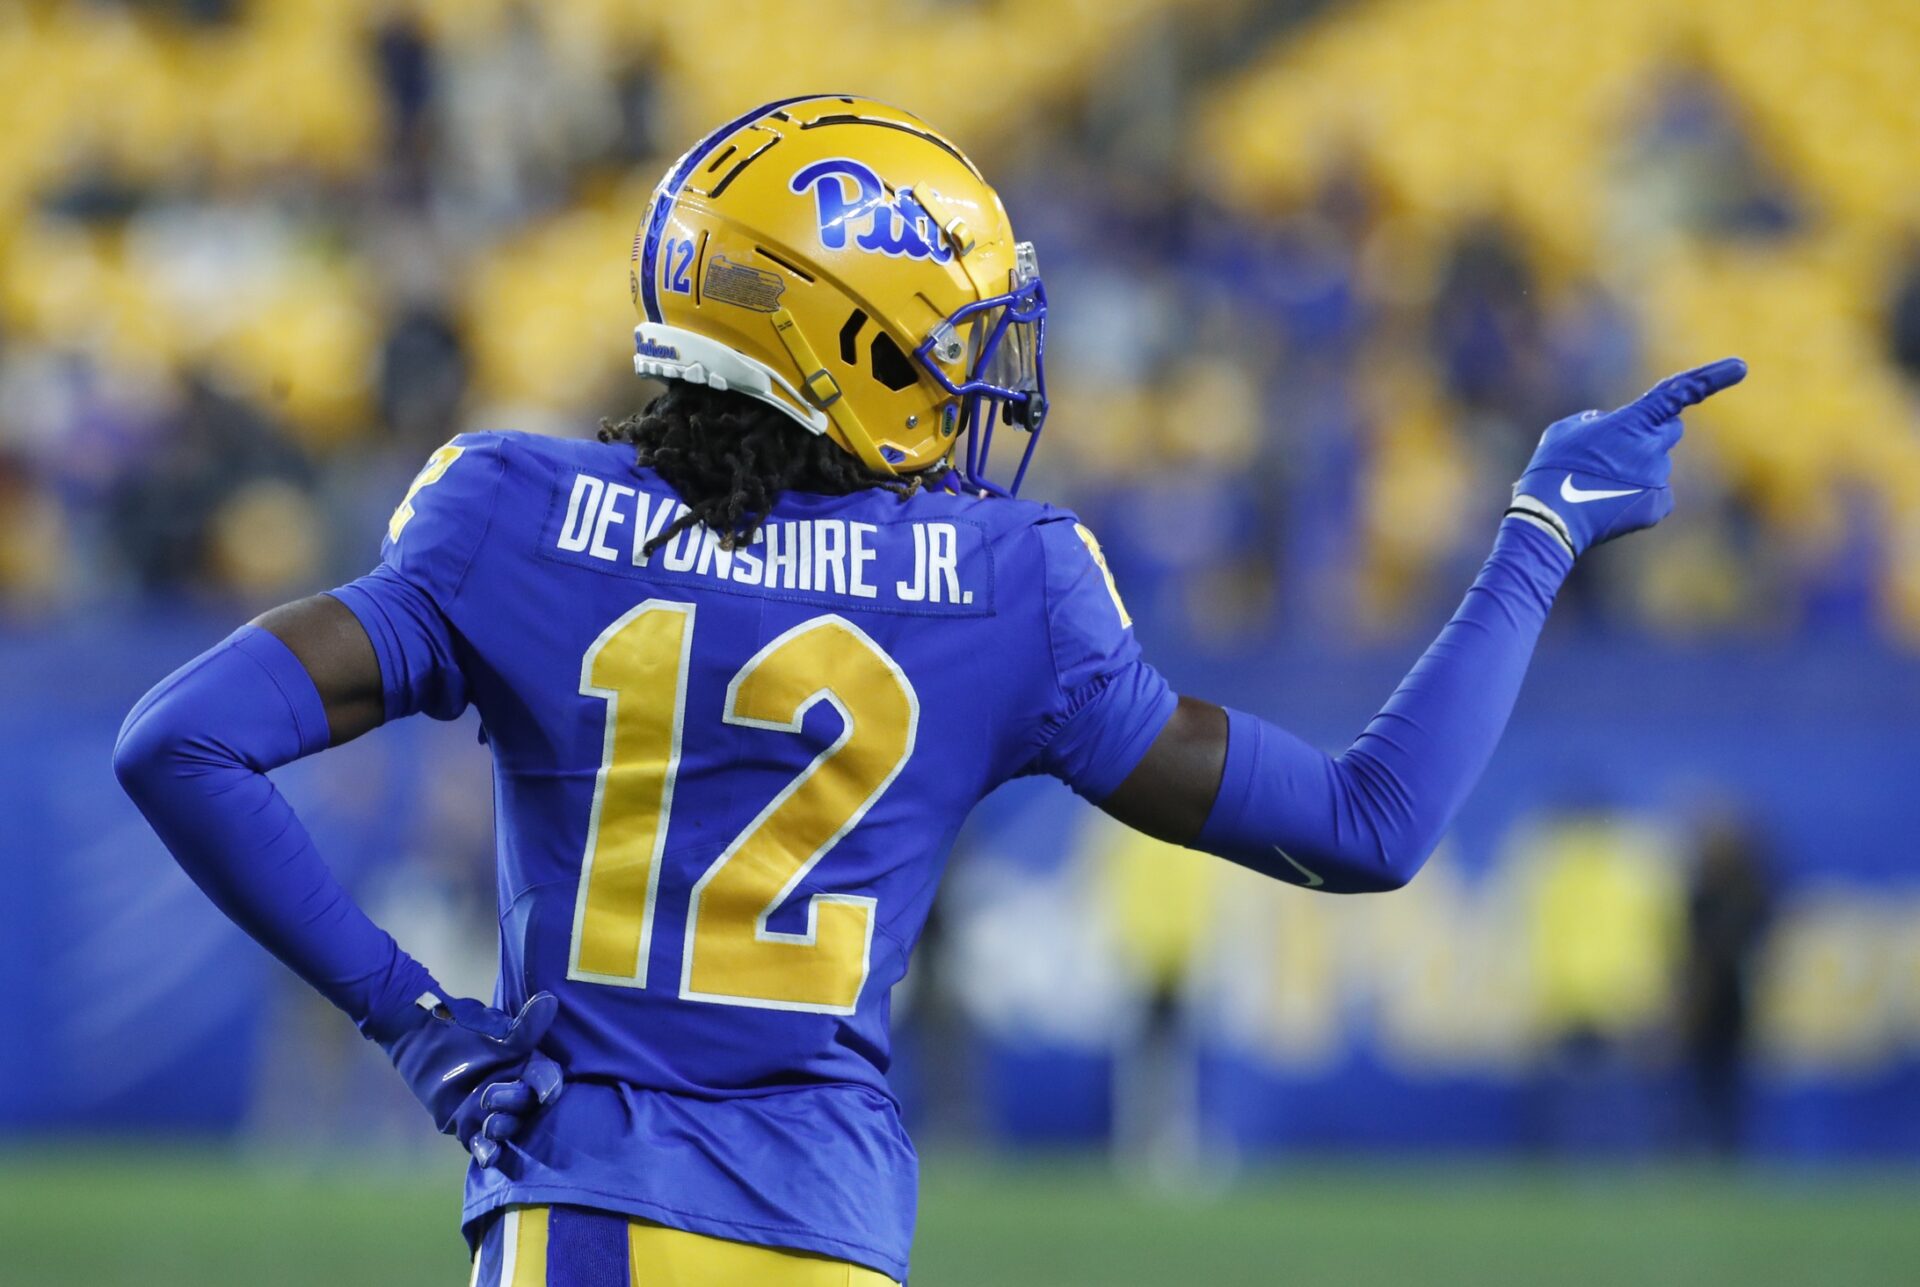 Pittsburgh Panthers DB M.J. Devonshire (12) gestures towards the opponent's bench during a game.